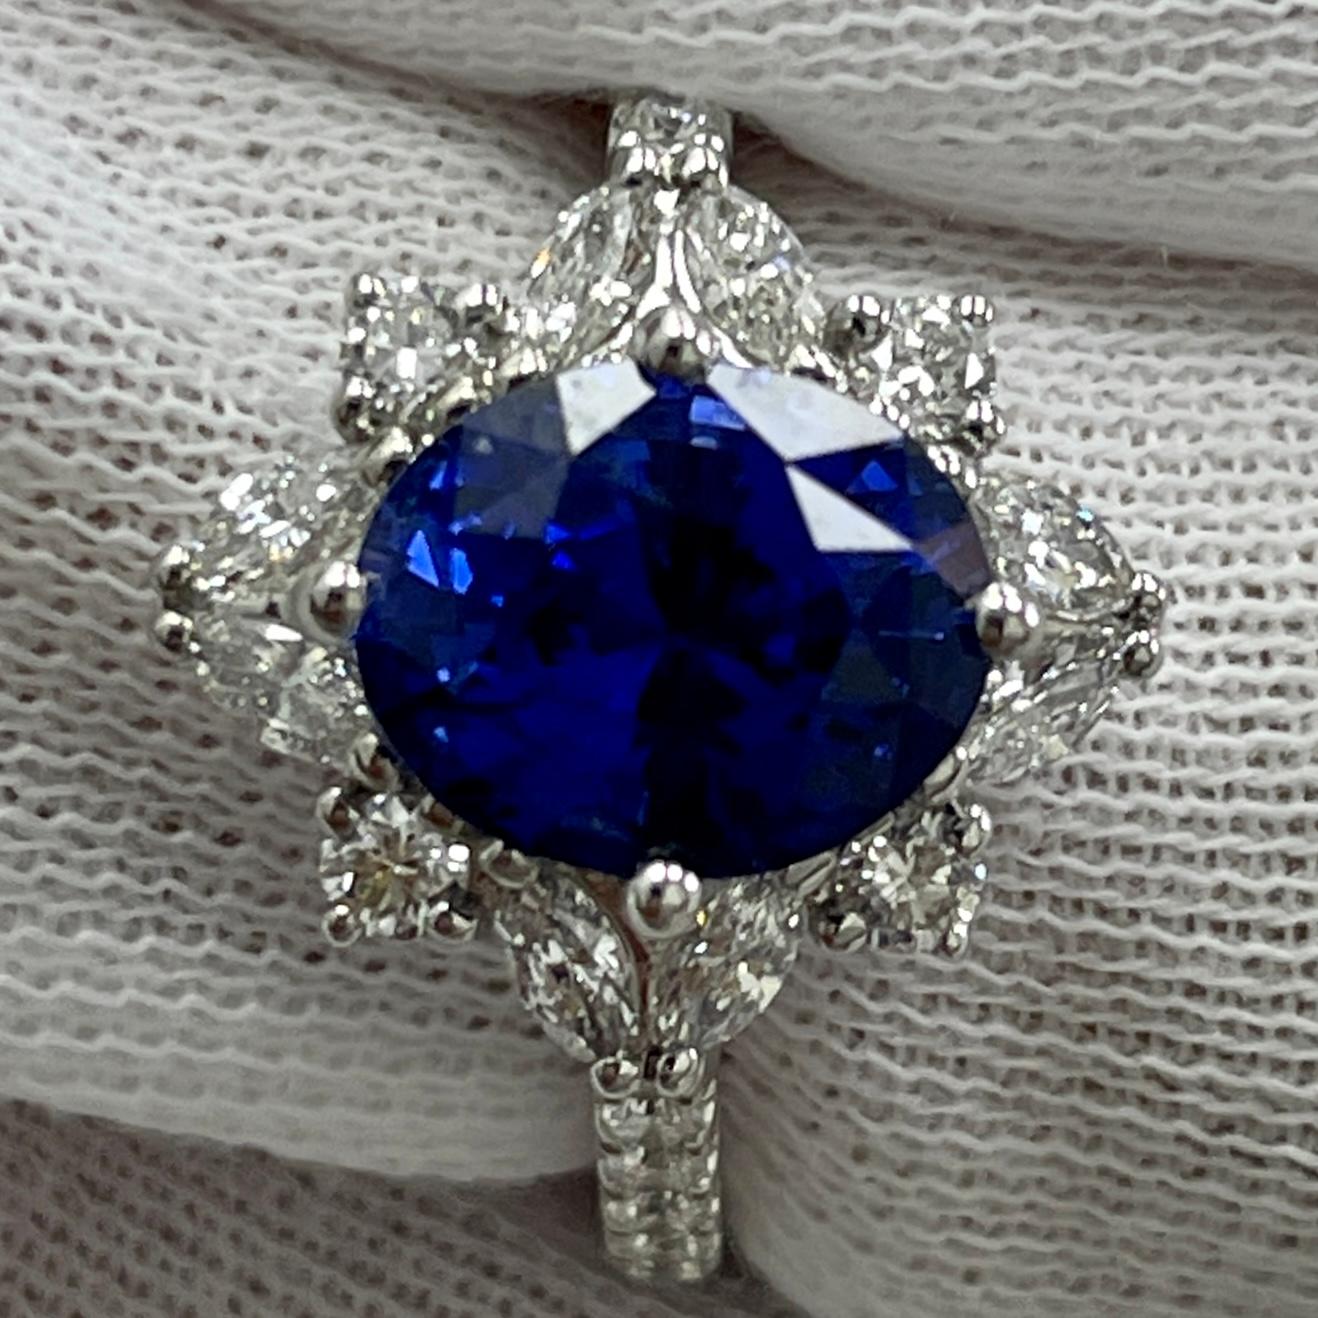 This is a BREATHTAKING sapphire with a very lively color, mounted in an elegant 18K white gold and diamond ring with 0.70carats of brilliant white diamonds. Suitable for any occasion!